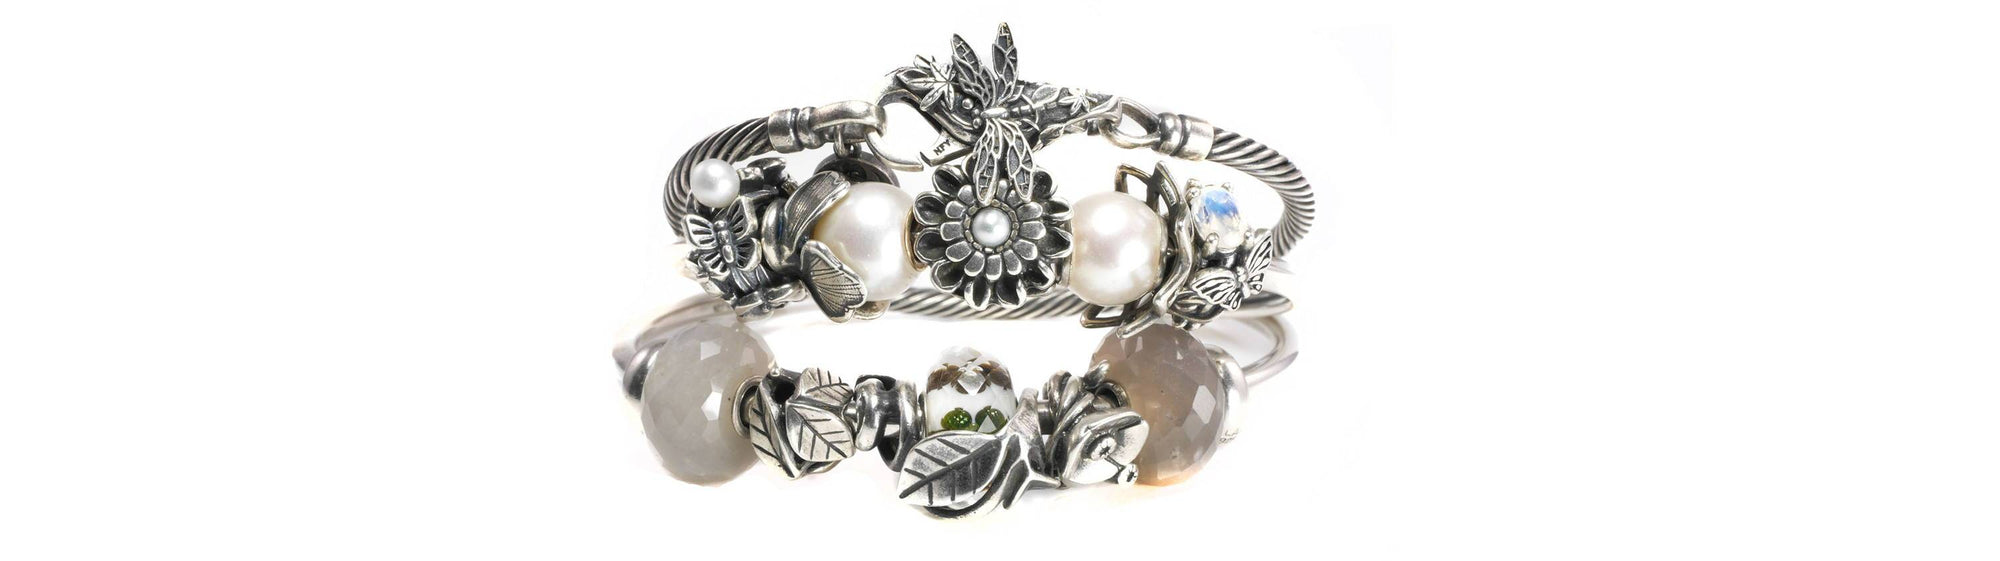 Winter Bangles Inspired by the Trollbeads Spring 2022 Collection